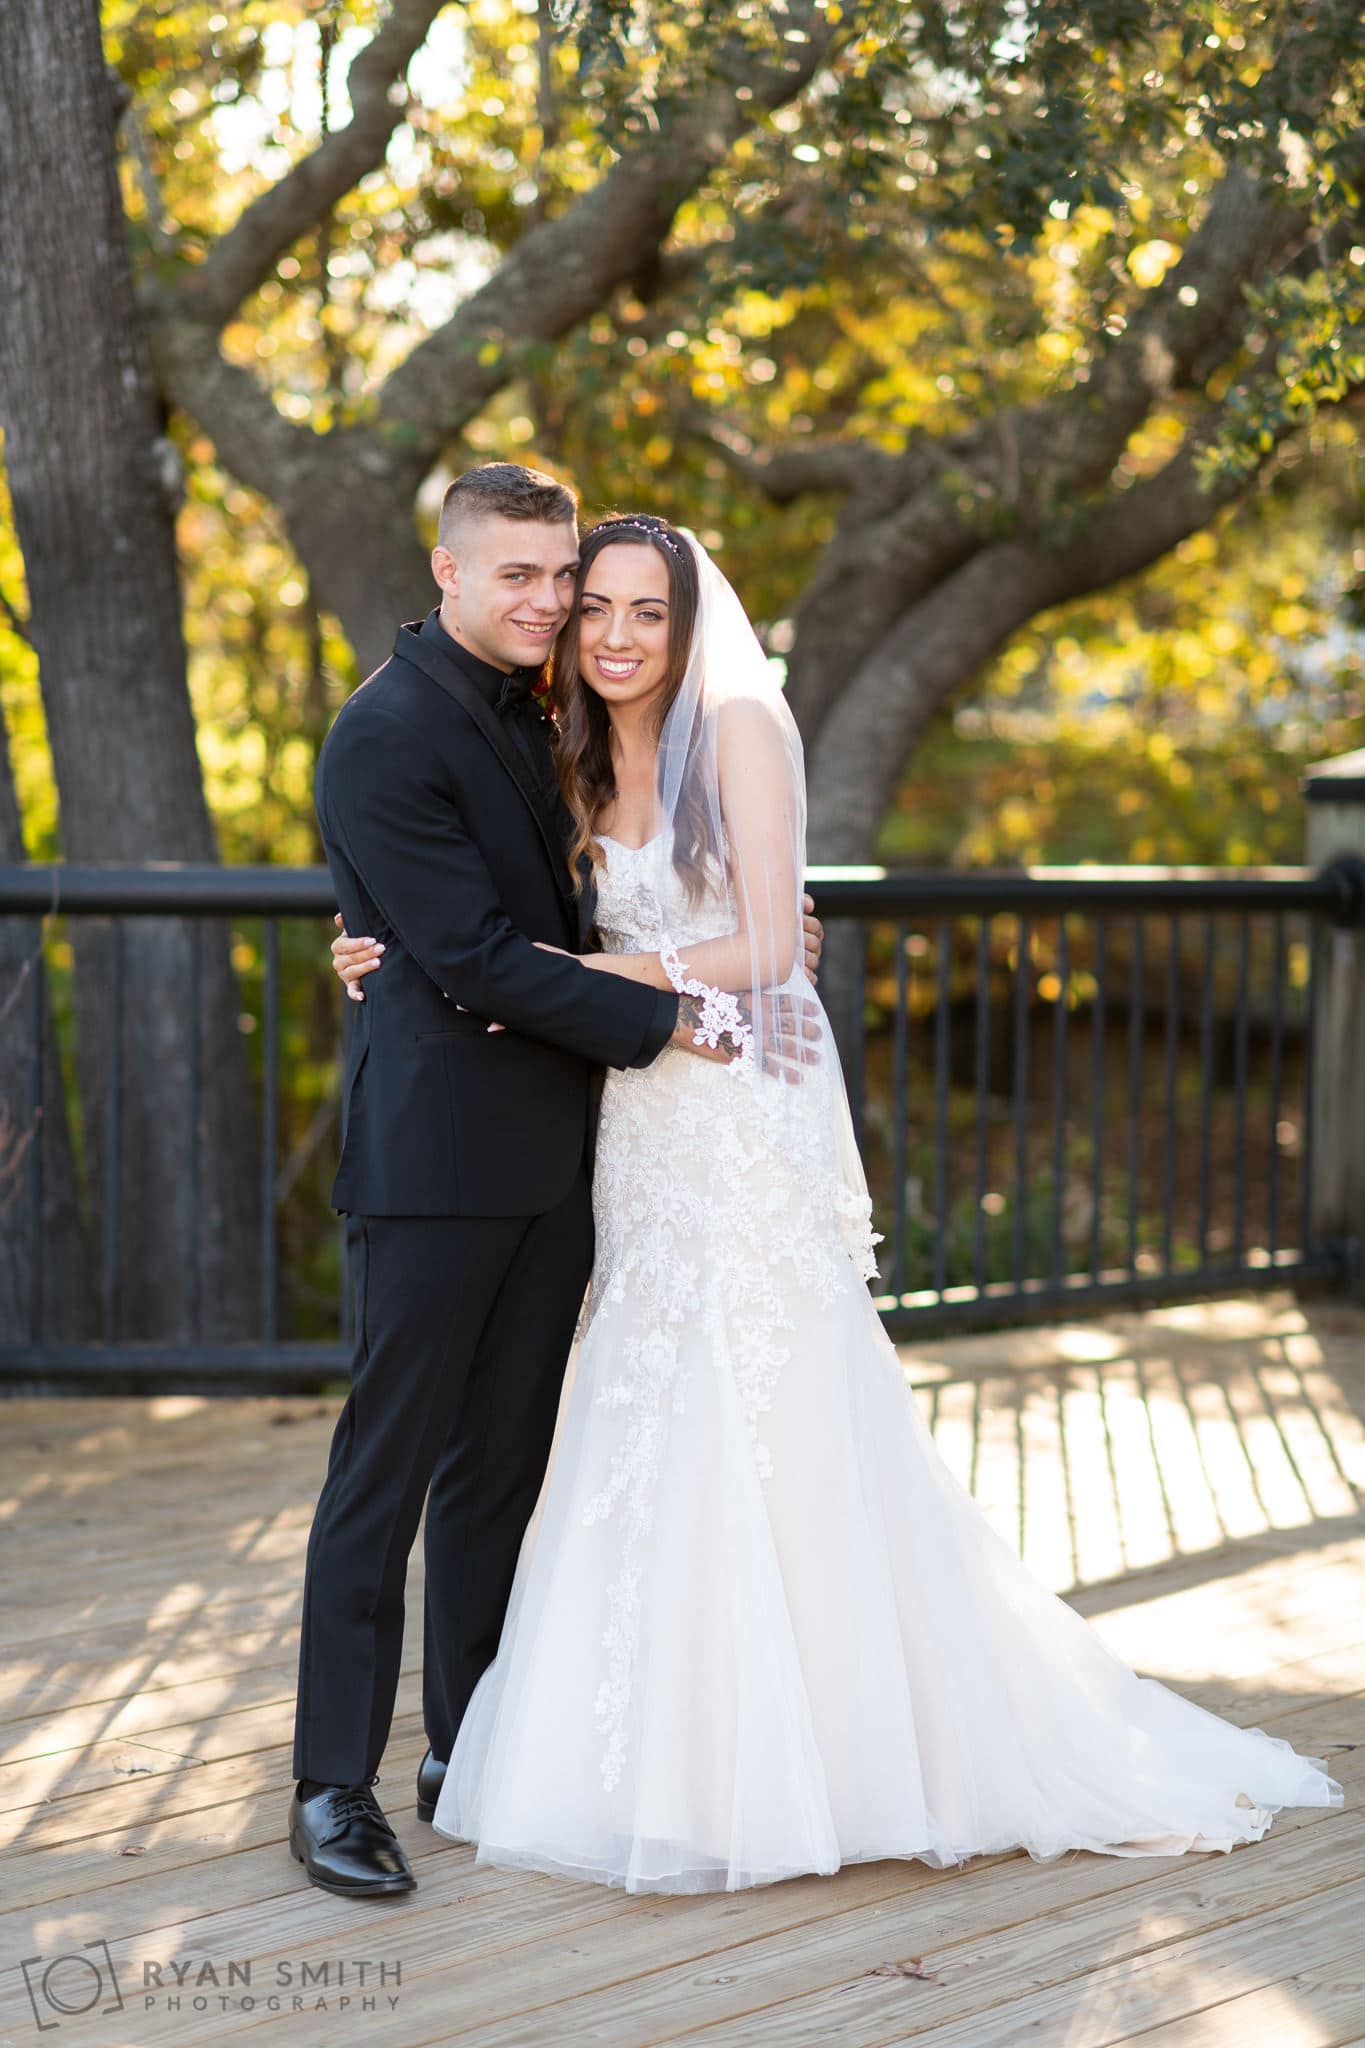 Portraits of the bride and groom on the south end of the boardwalk - Conway River Walk